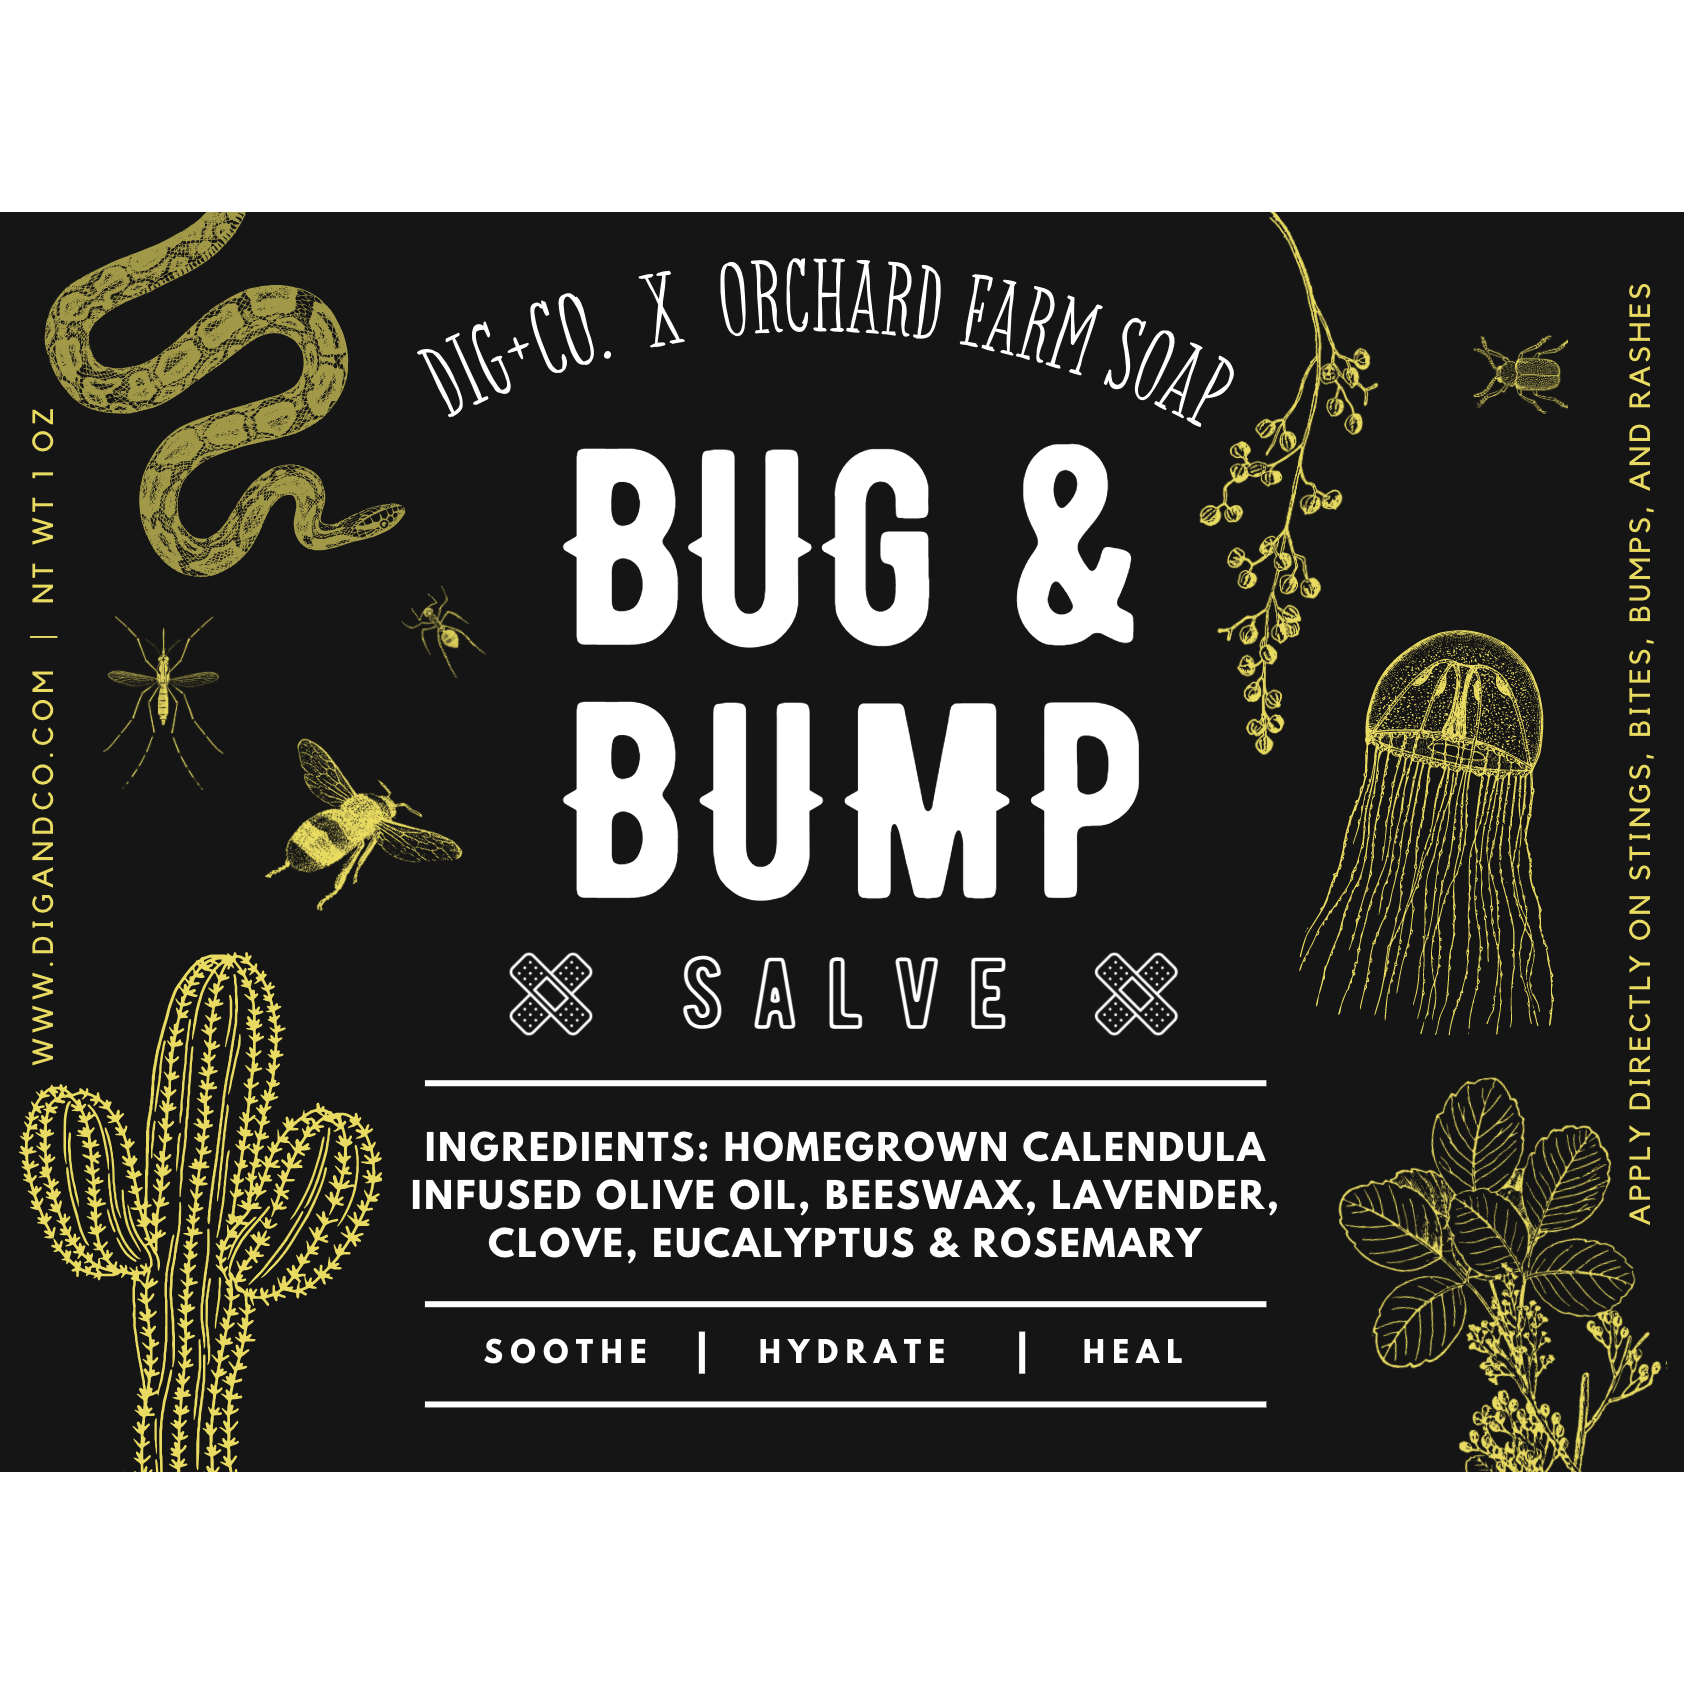 A digitally created black label of the Bug & Bump Salve. The label lists the ingredients to the salve and features a snake, a jellyfish, a variety of insects, and a cactus. 